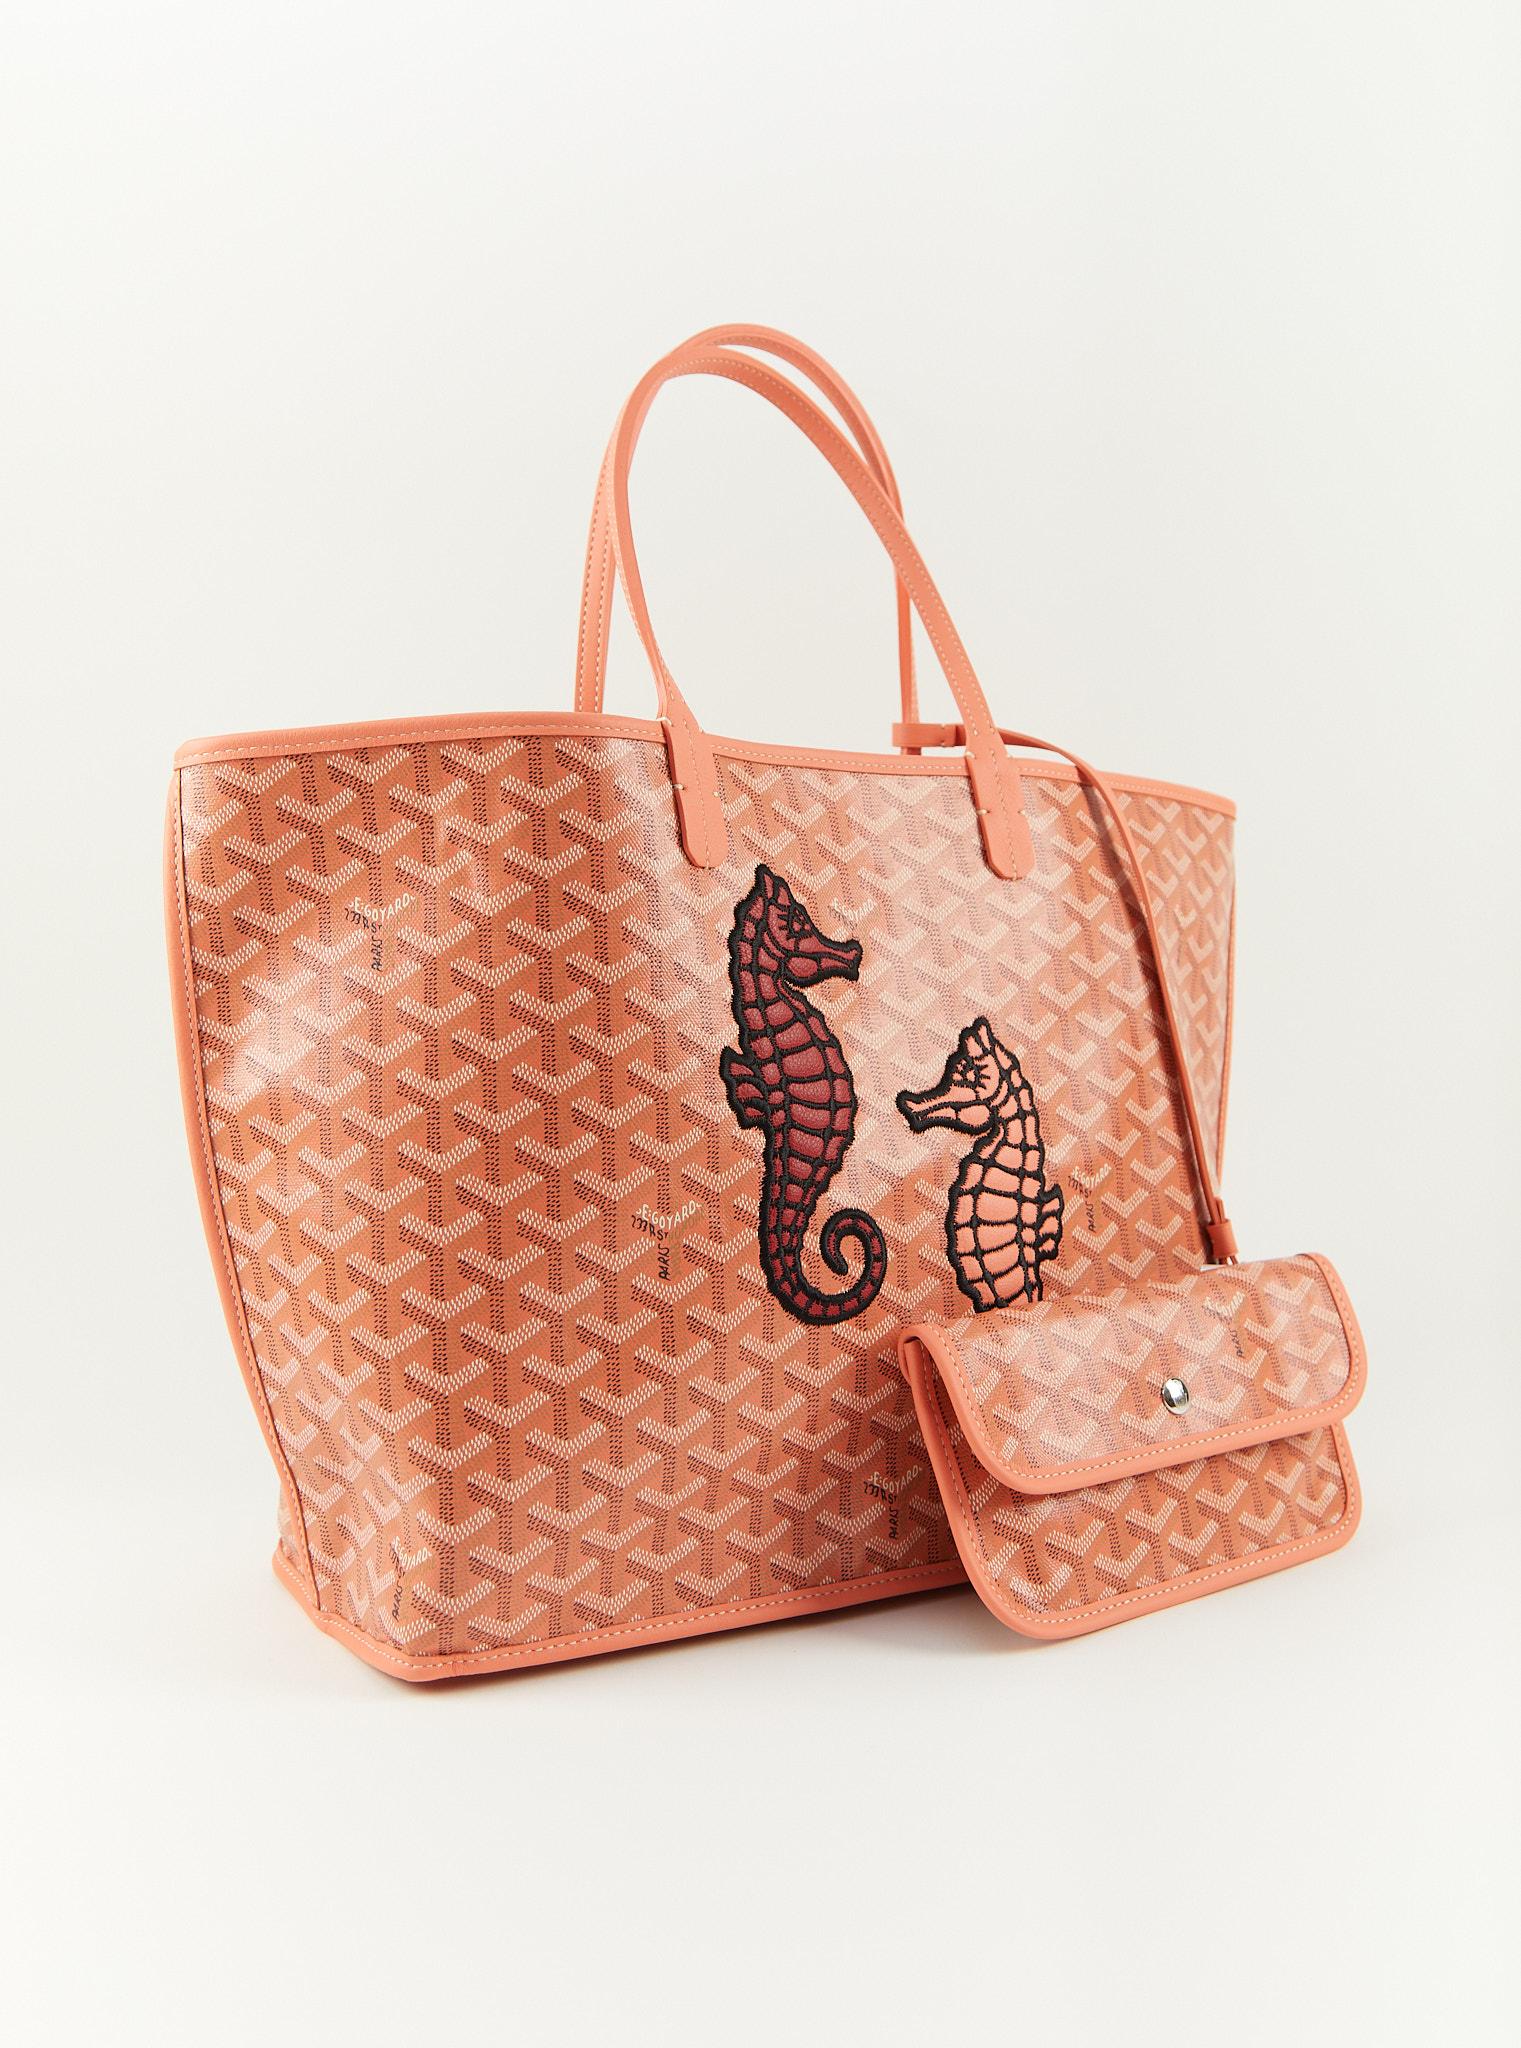 Goyard Anjou PM Seahourse Bag in Coral 

Chevroches Calfskin Leather & Goyardine Canvas

Detachable inner pouch

Accompanied by: Dustbag only 

Dimensions: 28 x 15 x 47 cm